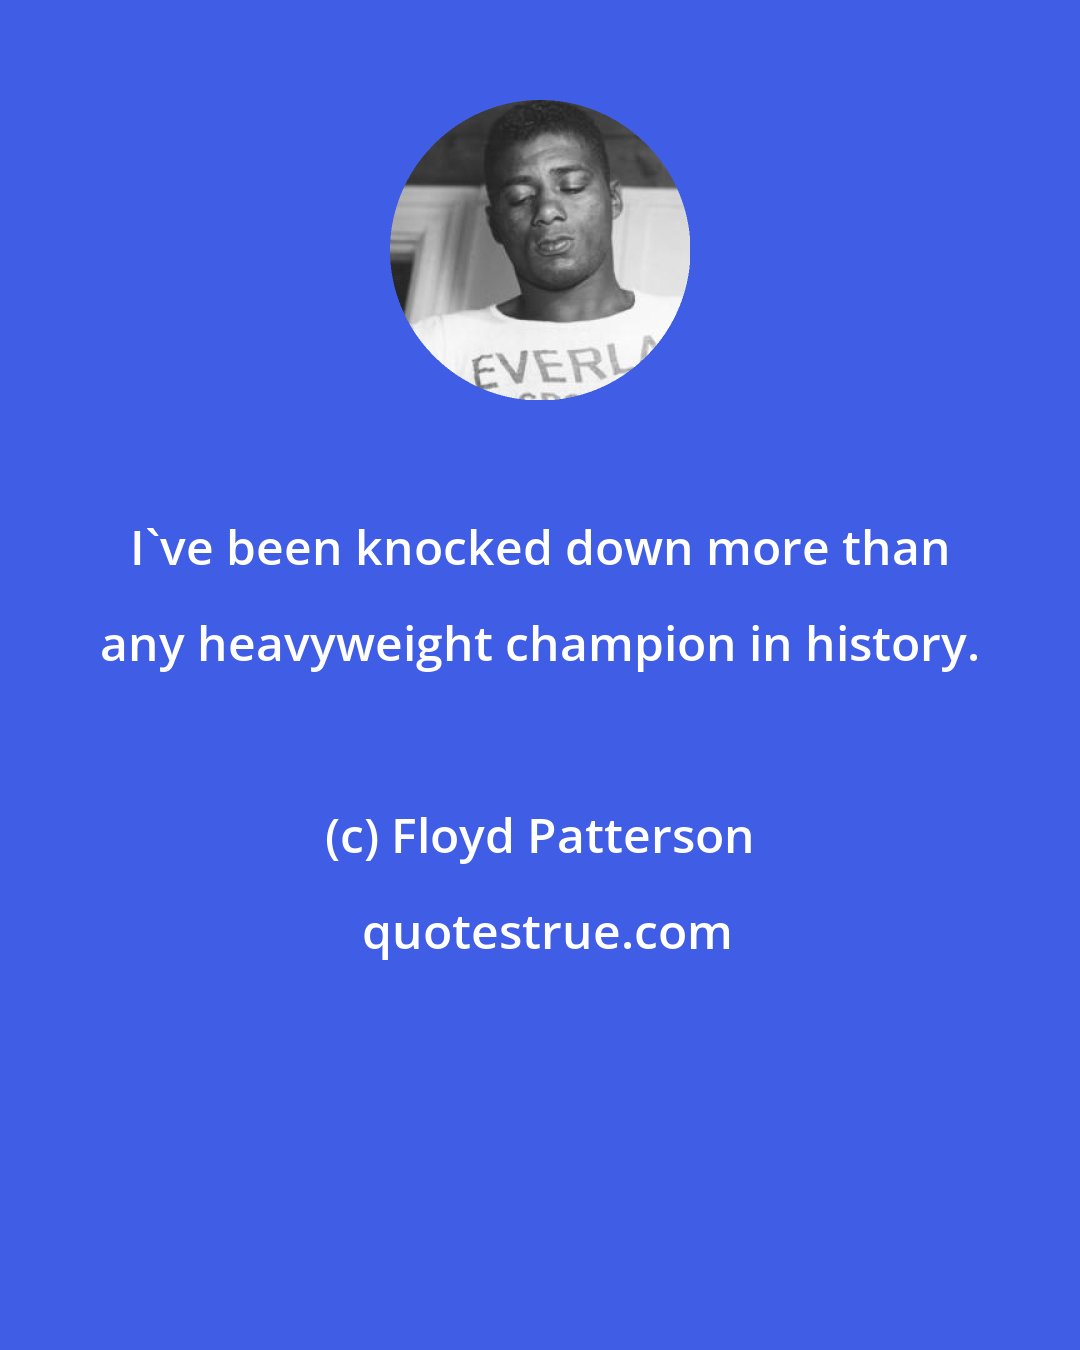 Floyd Patterson: I've been knocked down more than any heavyweight champion in history.